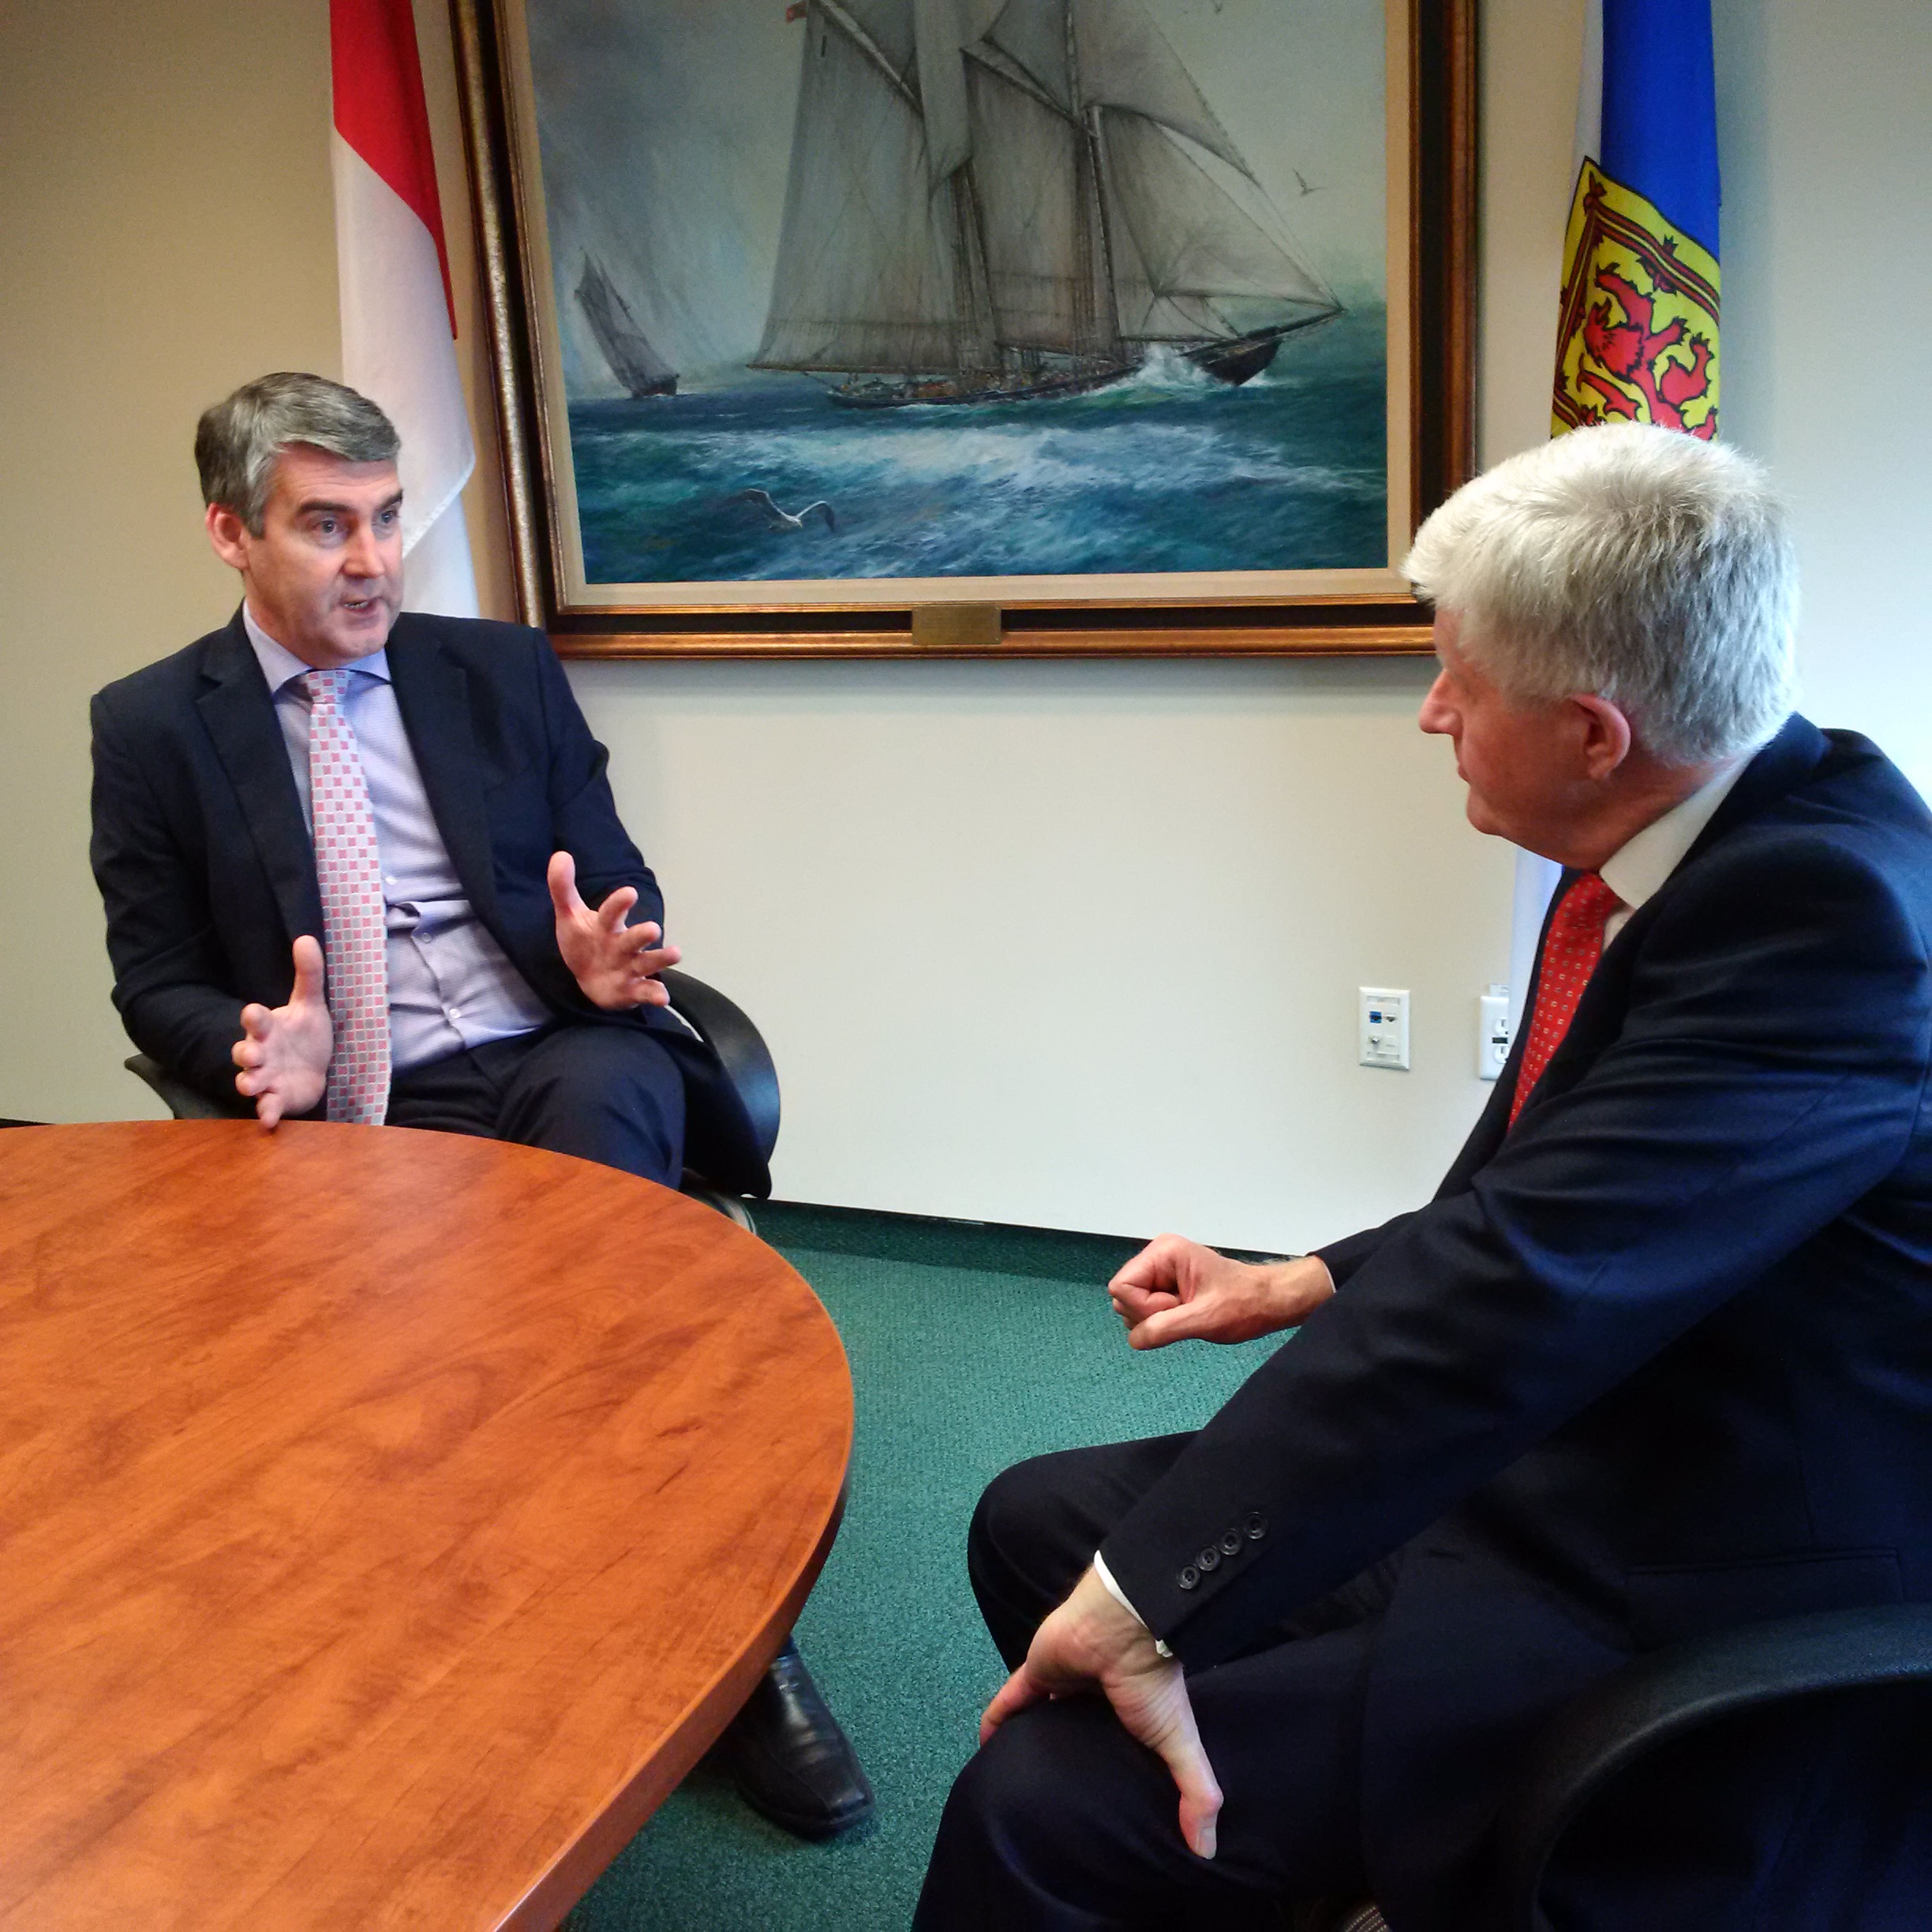 On November 17th, Premier McNeil met with His Excellency Howard Drake, British High Commissioner to Canada